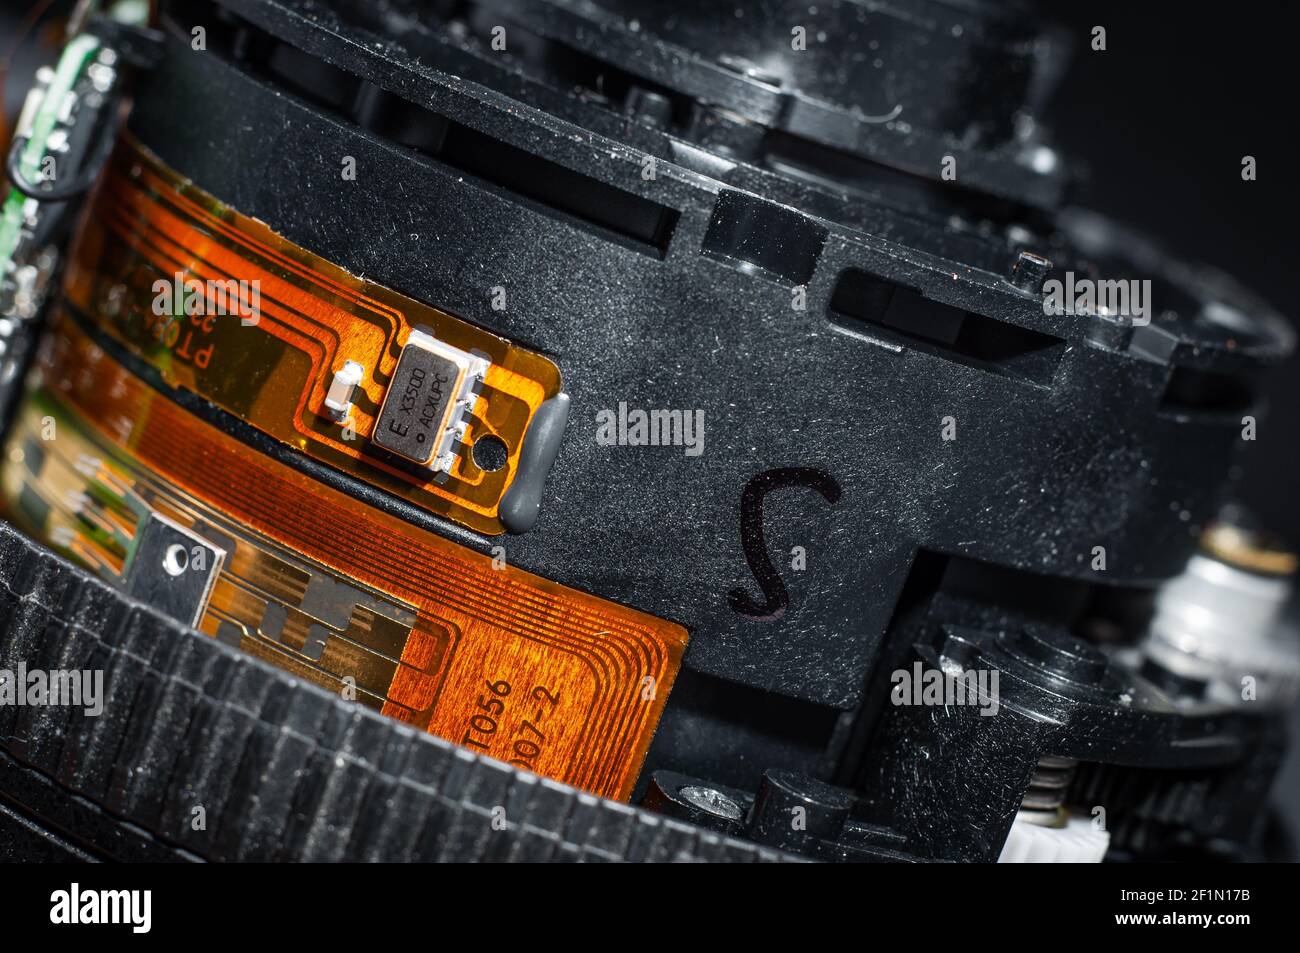 Microchip glued to the lens barrel. Repair and replacement of parts in photographic equipment Stock Photo